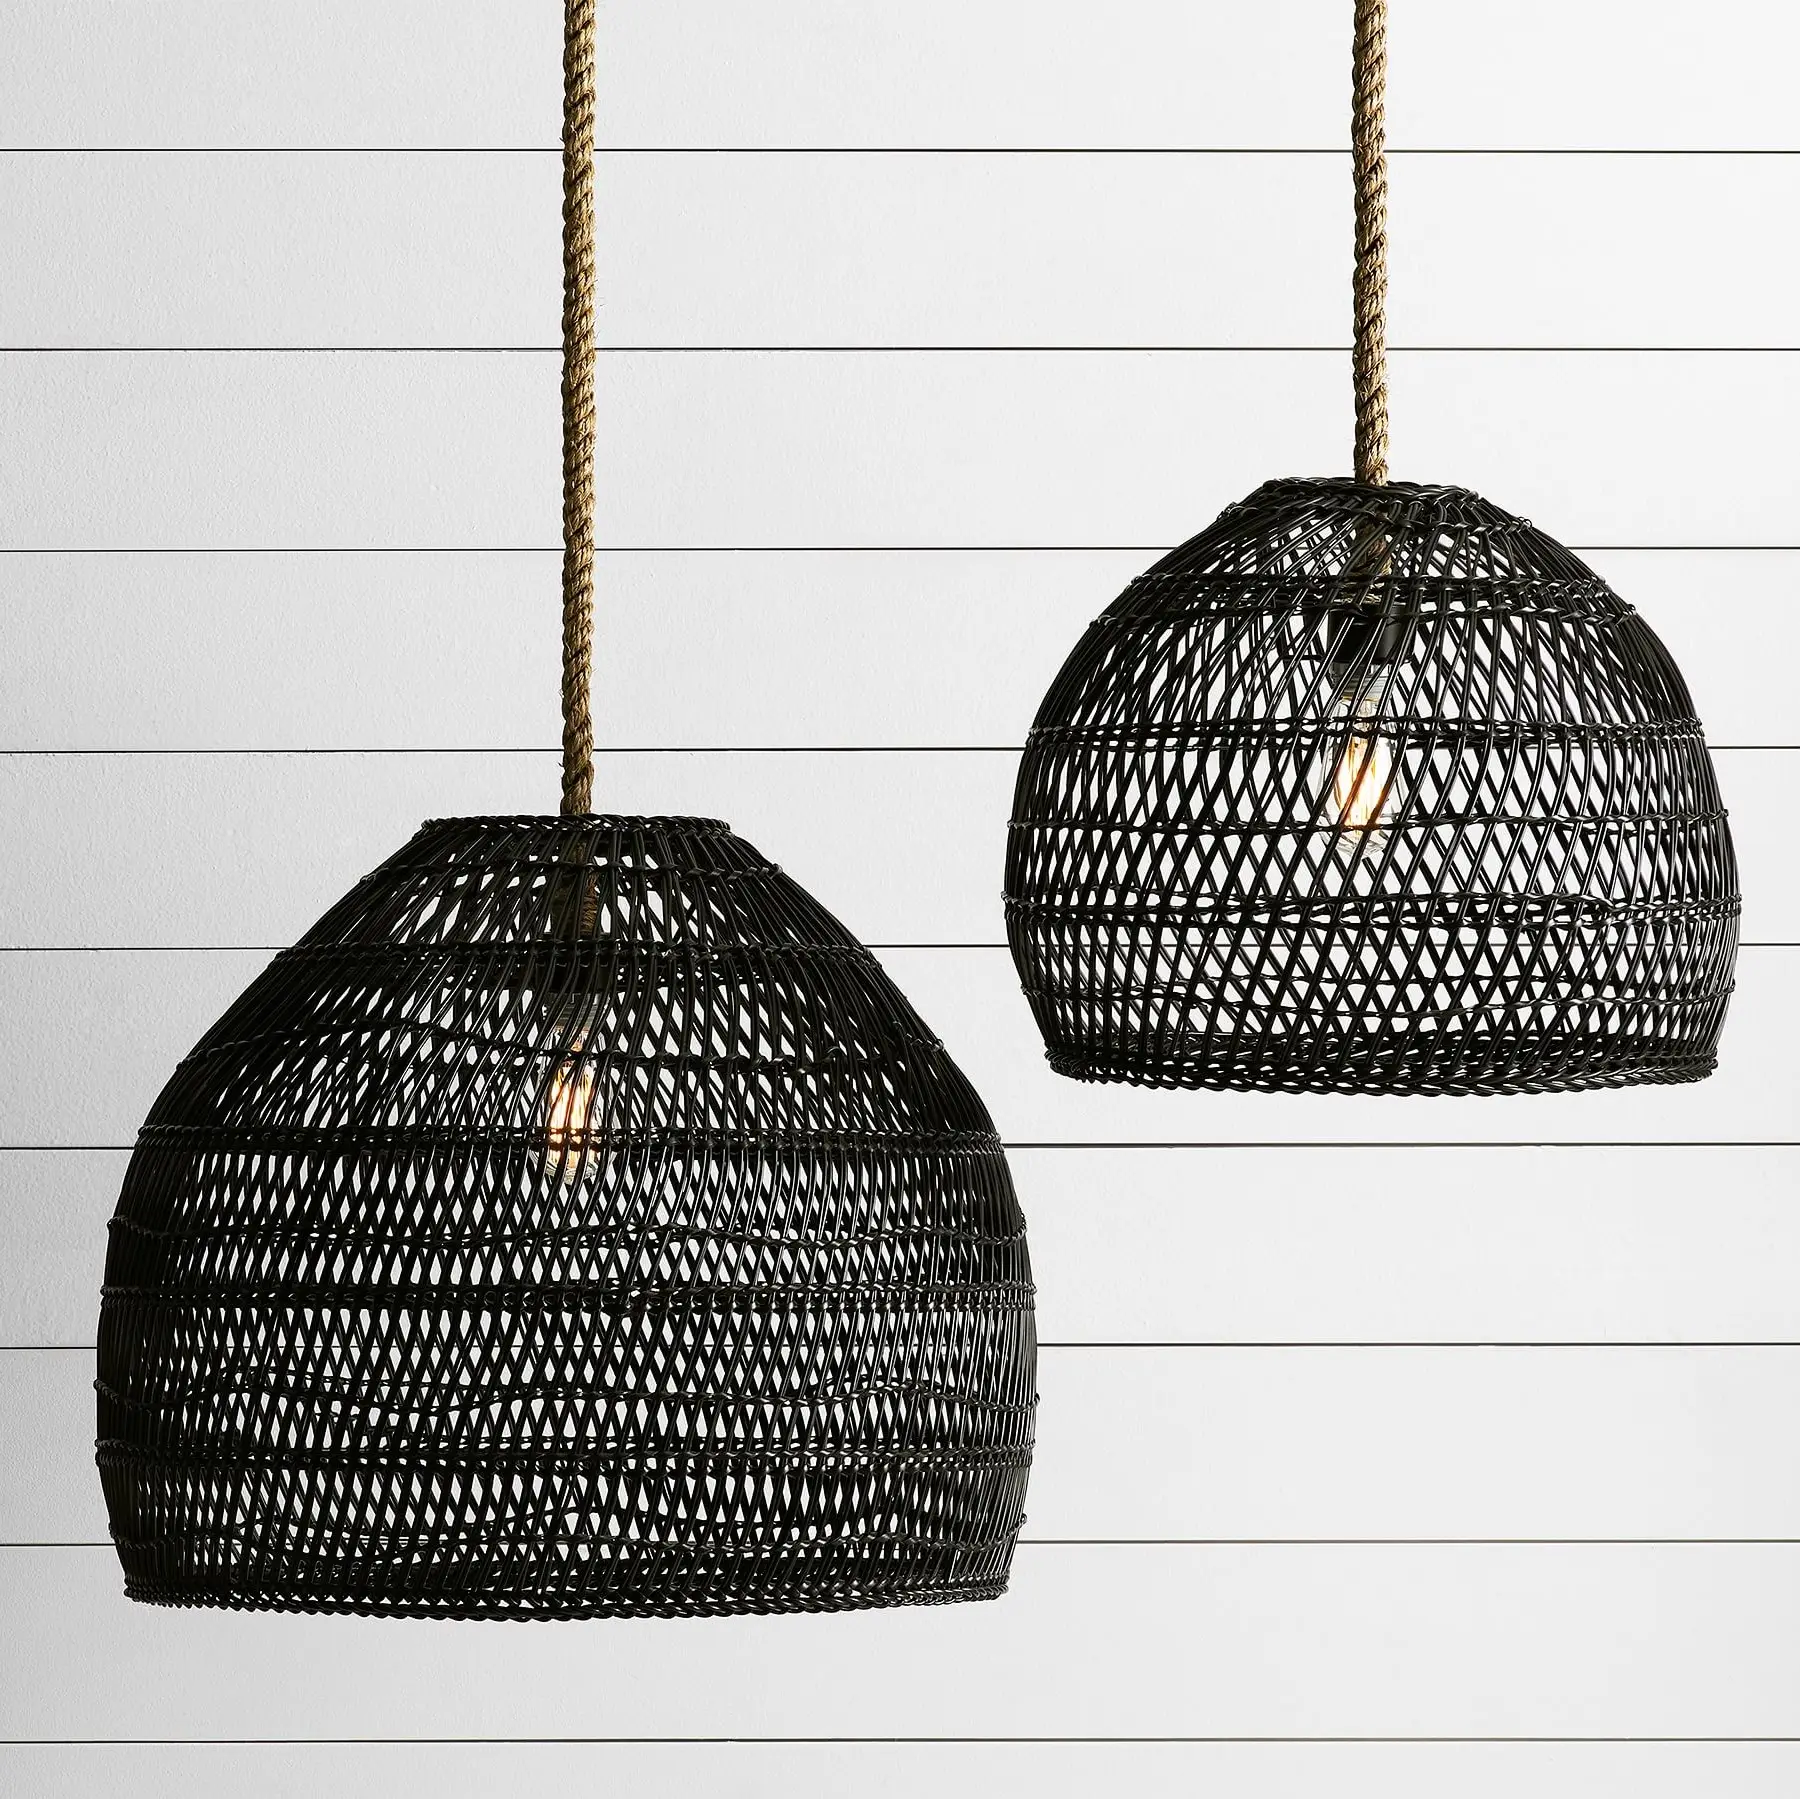 Rattan pendant lampshade rustic style wicker lampshades frame black hanging lamp cover cheapest lamps shade